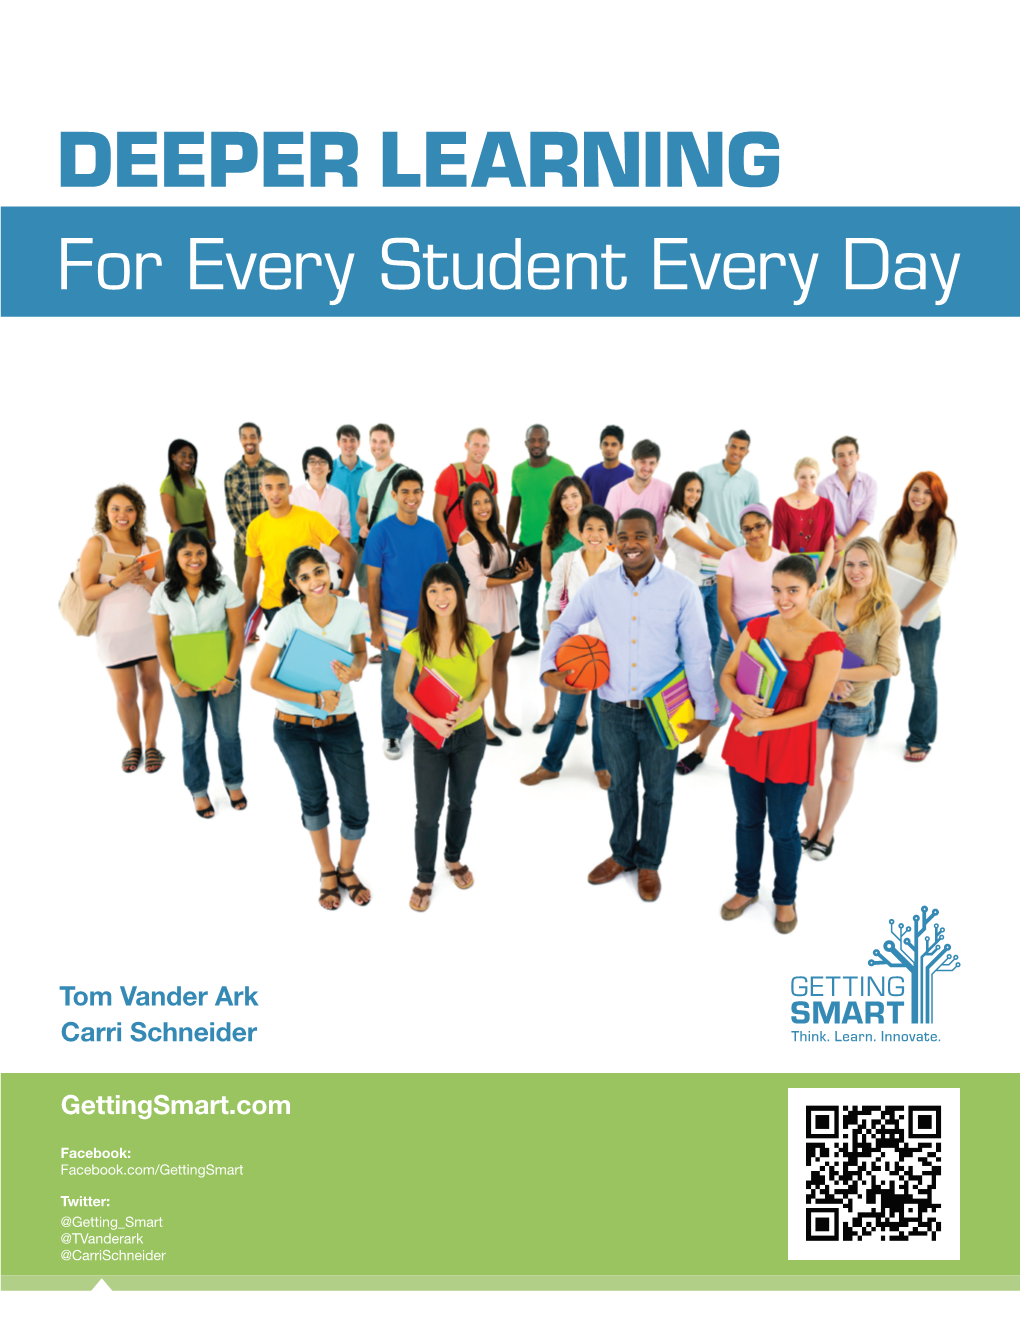 Deeper Learning for Every Student Every Day